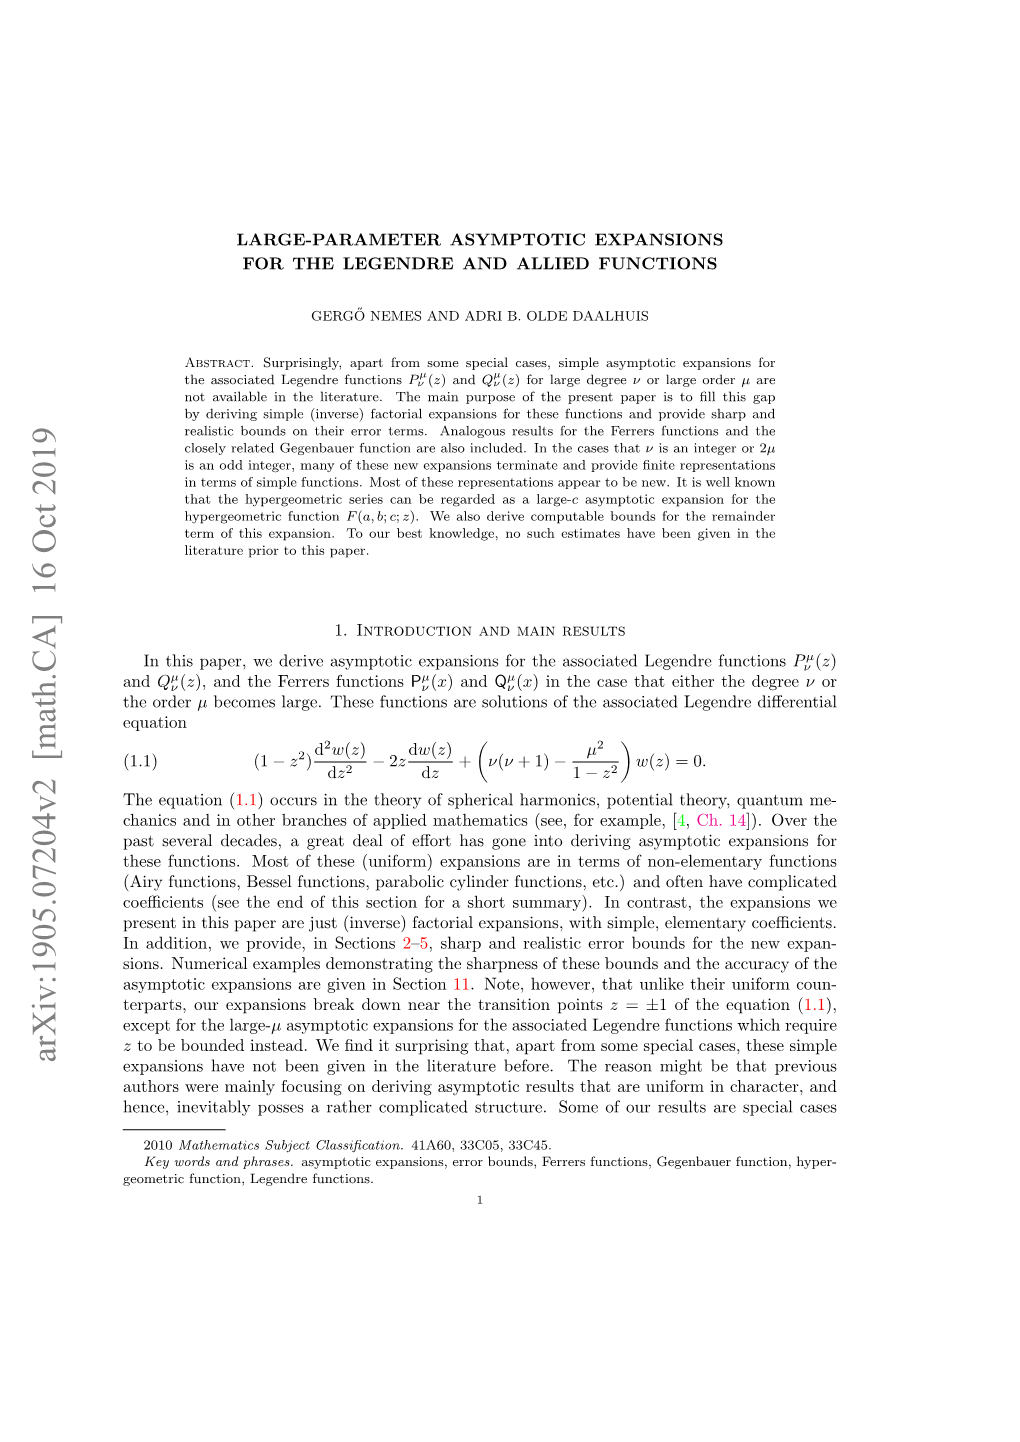 Large-Parameter Asymptotic Expansions for the Legendre and Allied Functions